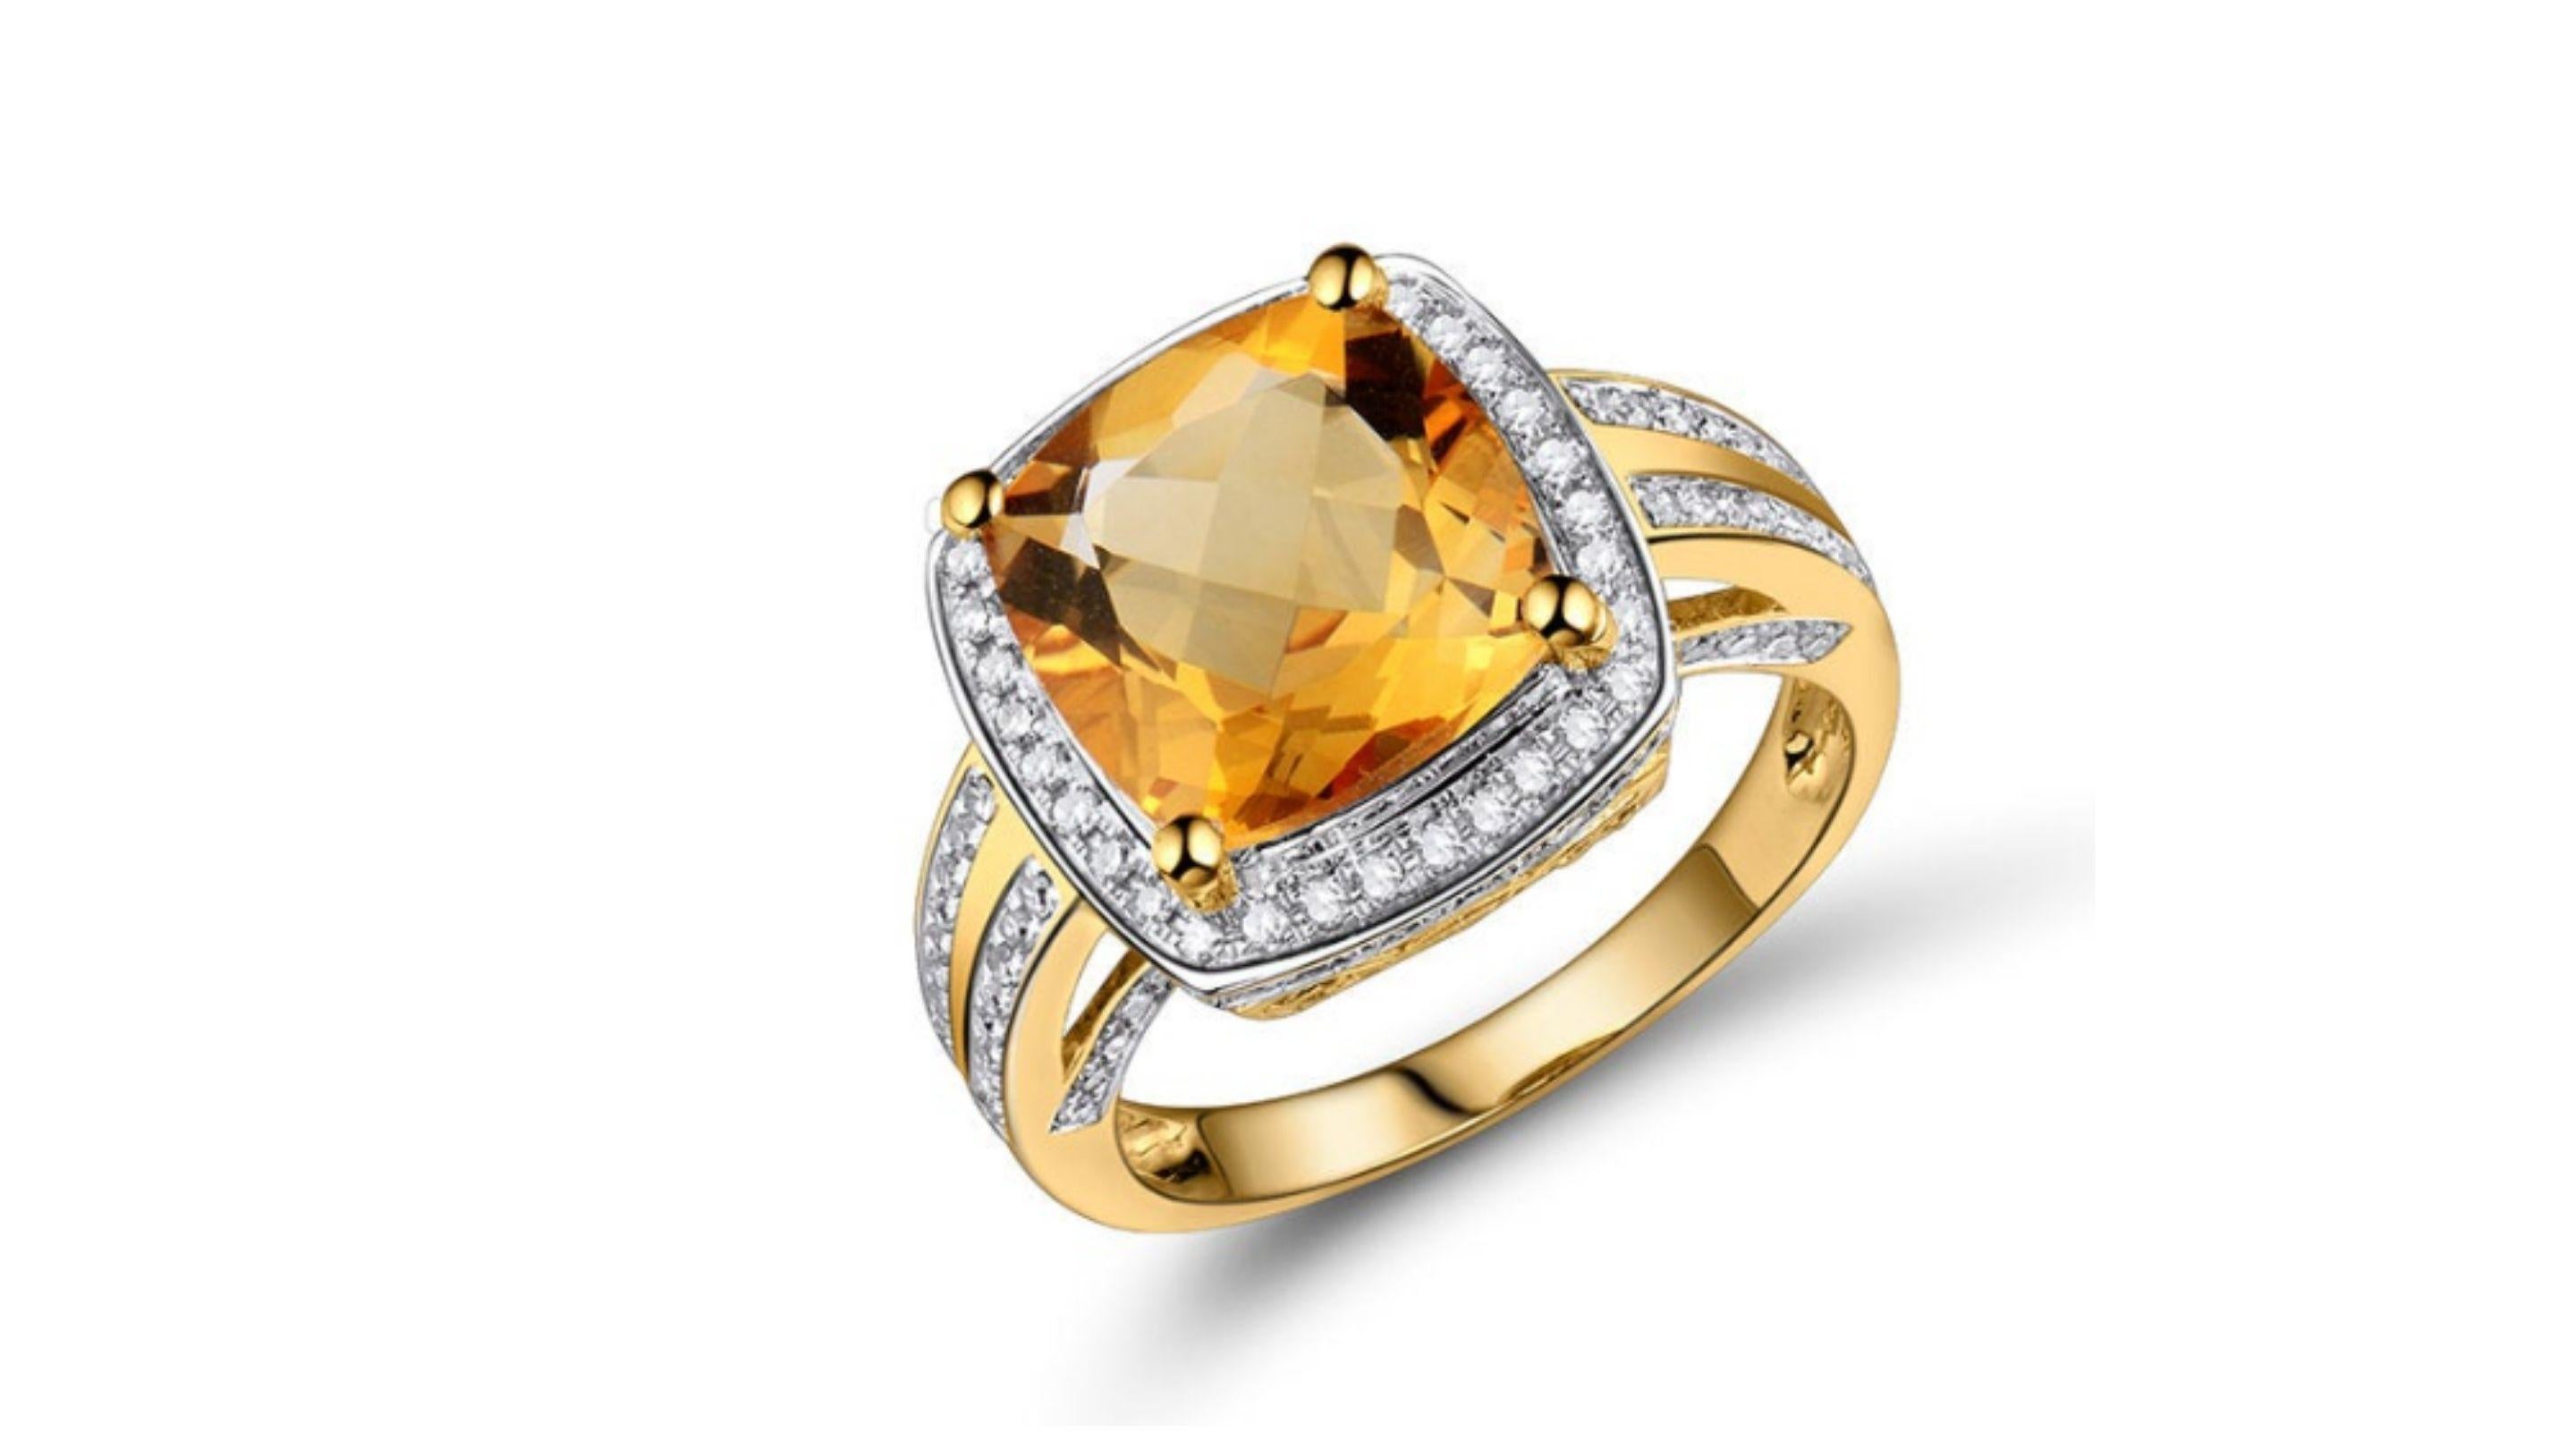 THIS REALLY IS A WOW FACTOR WHEN IT COMES TO CITRINE RINGS AND WITH DIAMONDS AROUND MAIN STONE AND DOWN EACH SIDE OF THE RING BAND. ALSO THE DIAMONDS ARE PLACES ON THE FRONT JUT UNDER THE MAIN STONE  FACING IF YOU LOOK CLOSER.  IF YOU DONT SEE YOUR